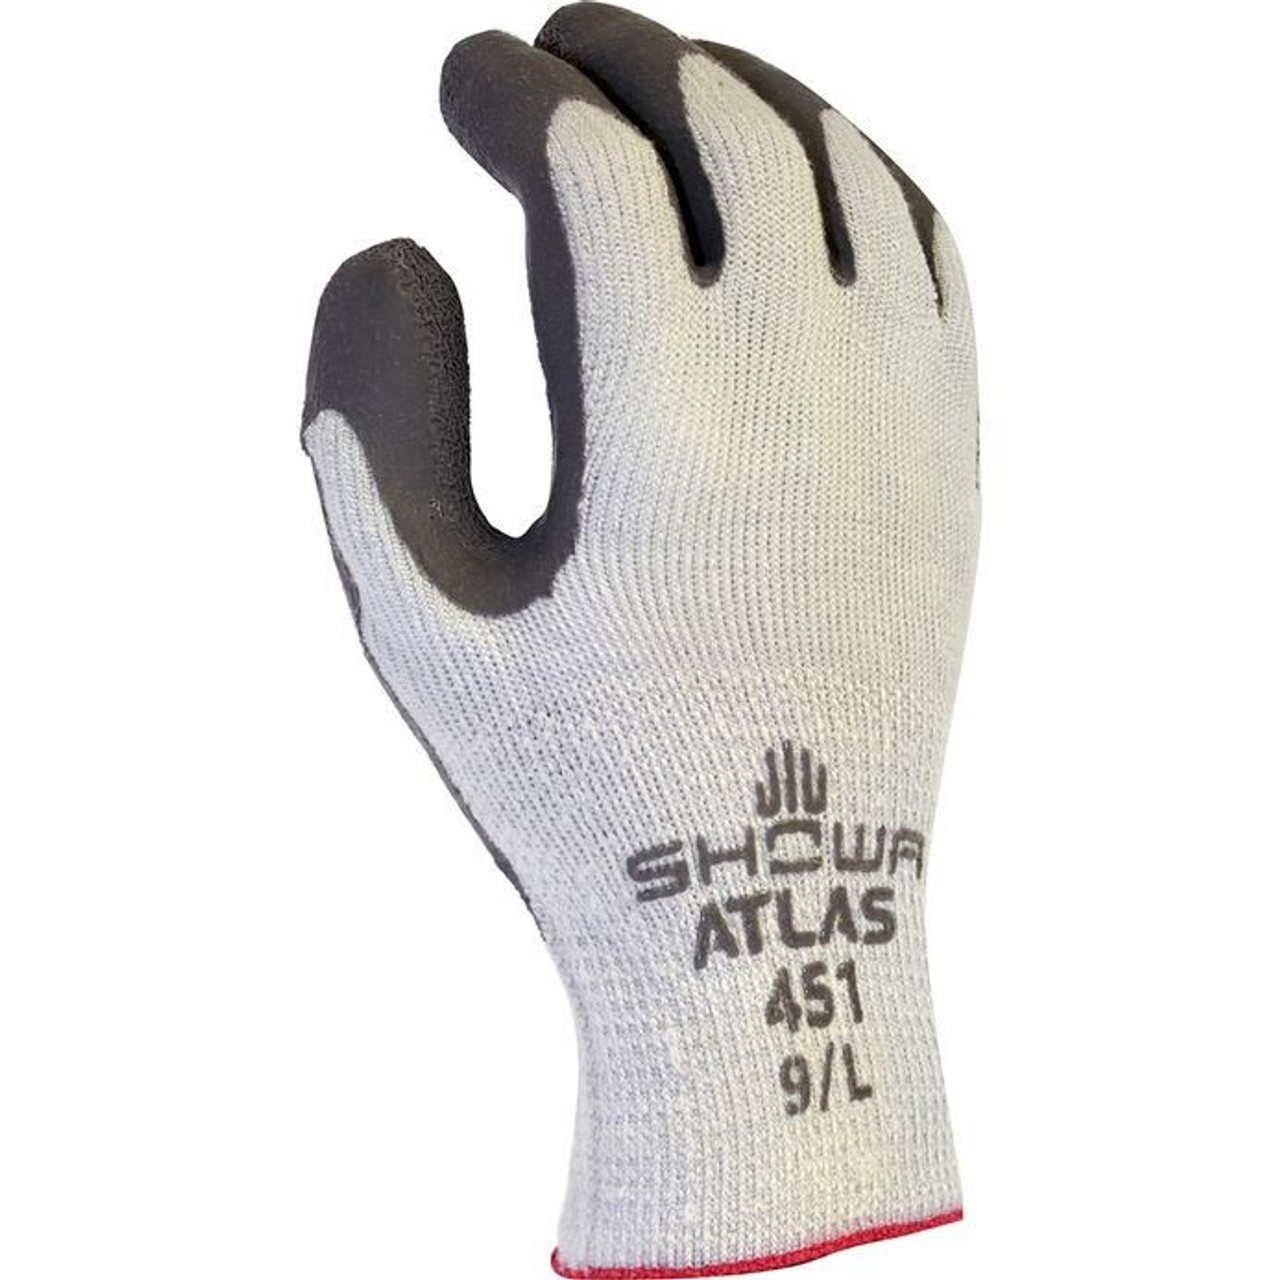 12-Pair Large Atlas Showa Grey 451 Therma-Fit 10-Gauge Insulated Seamless Liner Work Gloves with Natural Rubber Latex Coating 